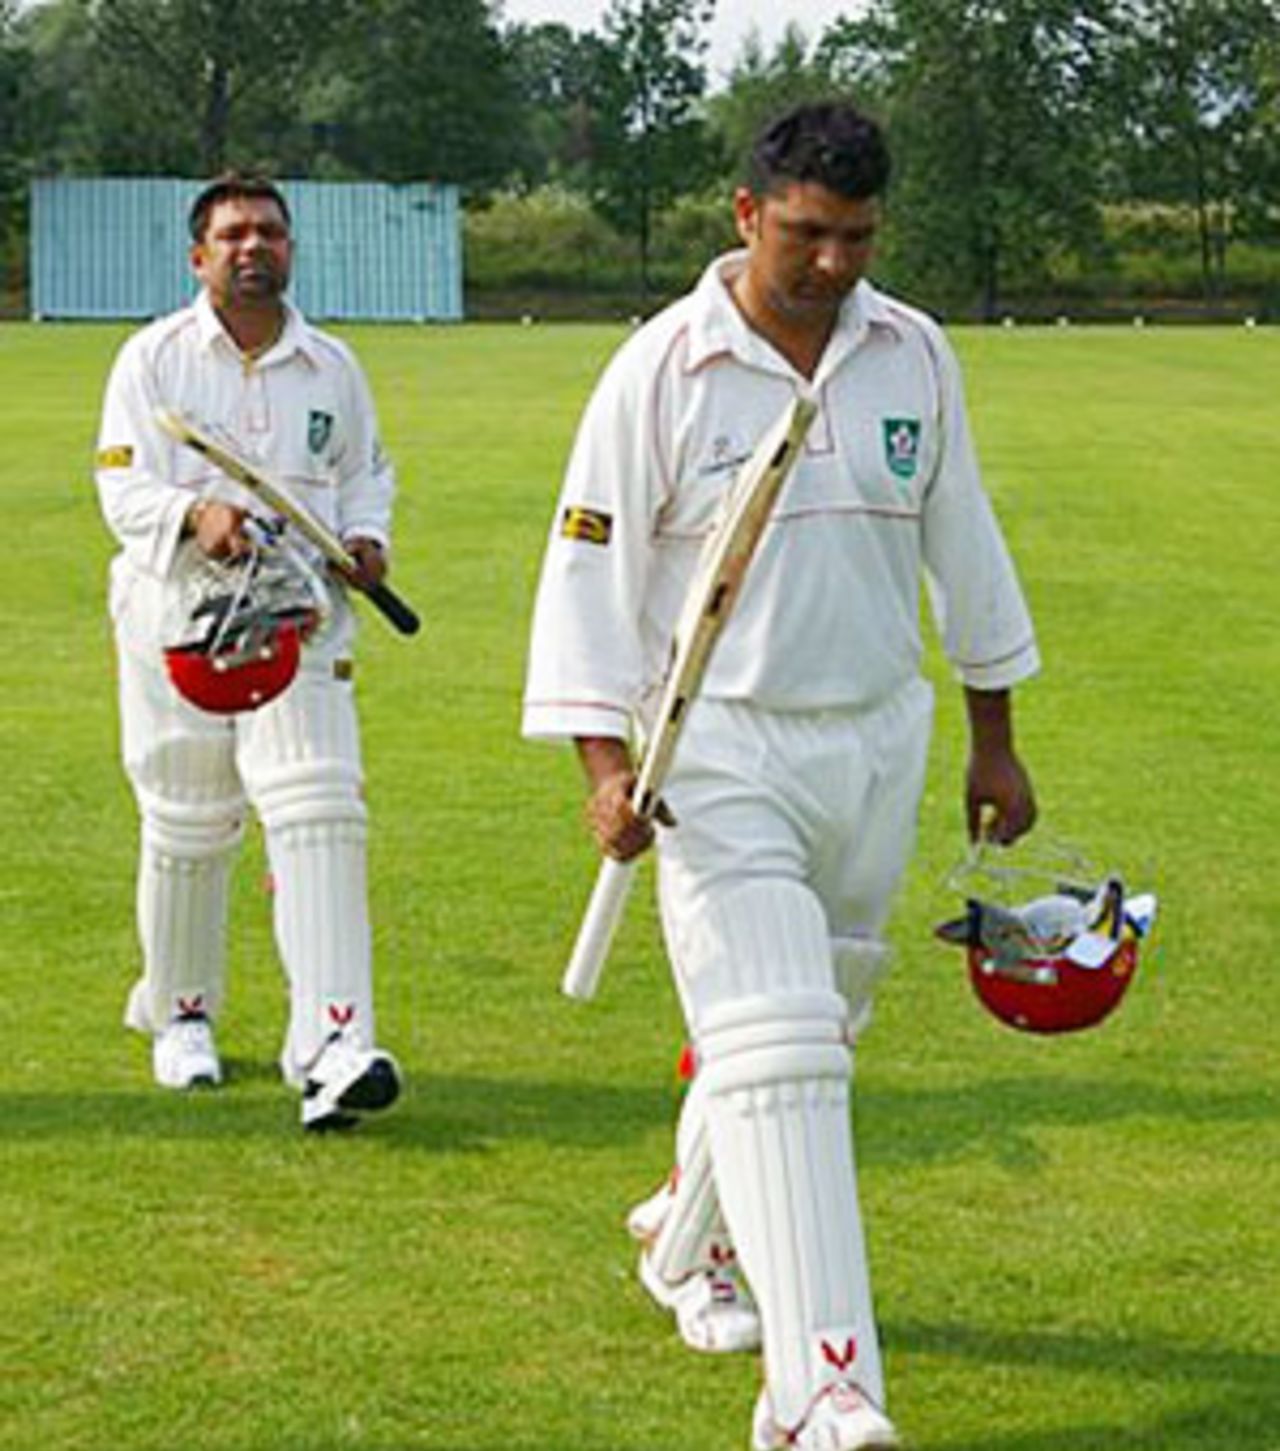 Qaiser Ali comes off after smacking 91 not out, Canada v Kenya, Ontario, July 29, 2006